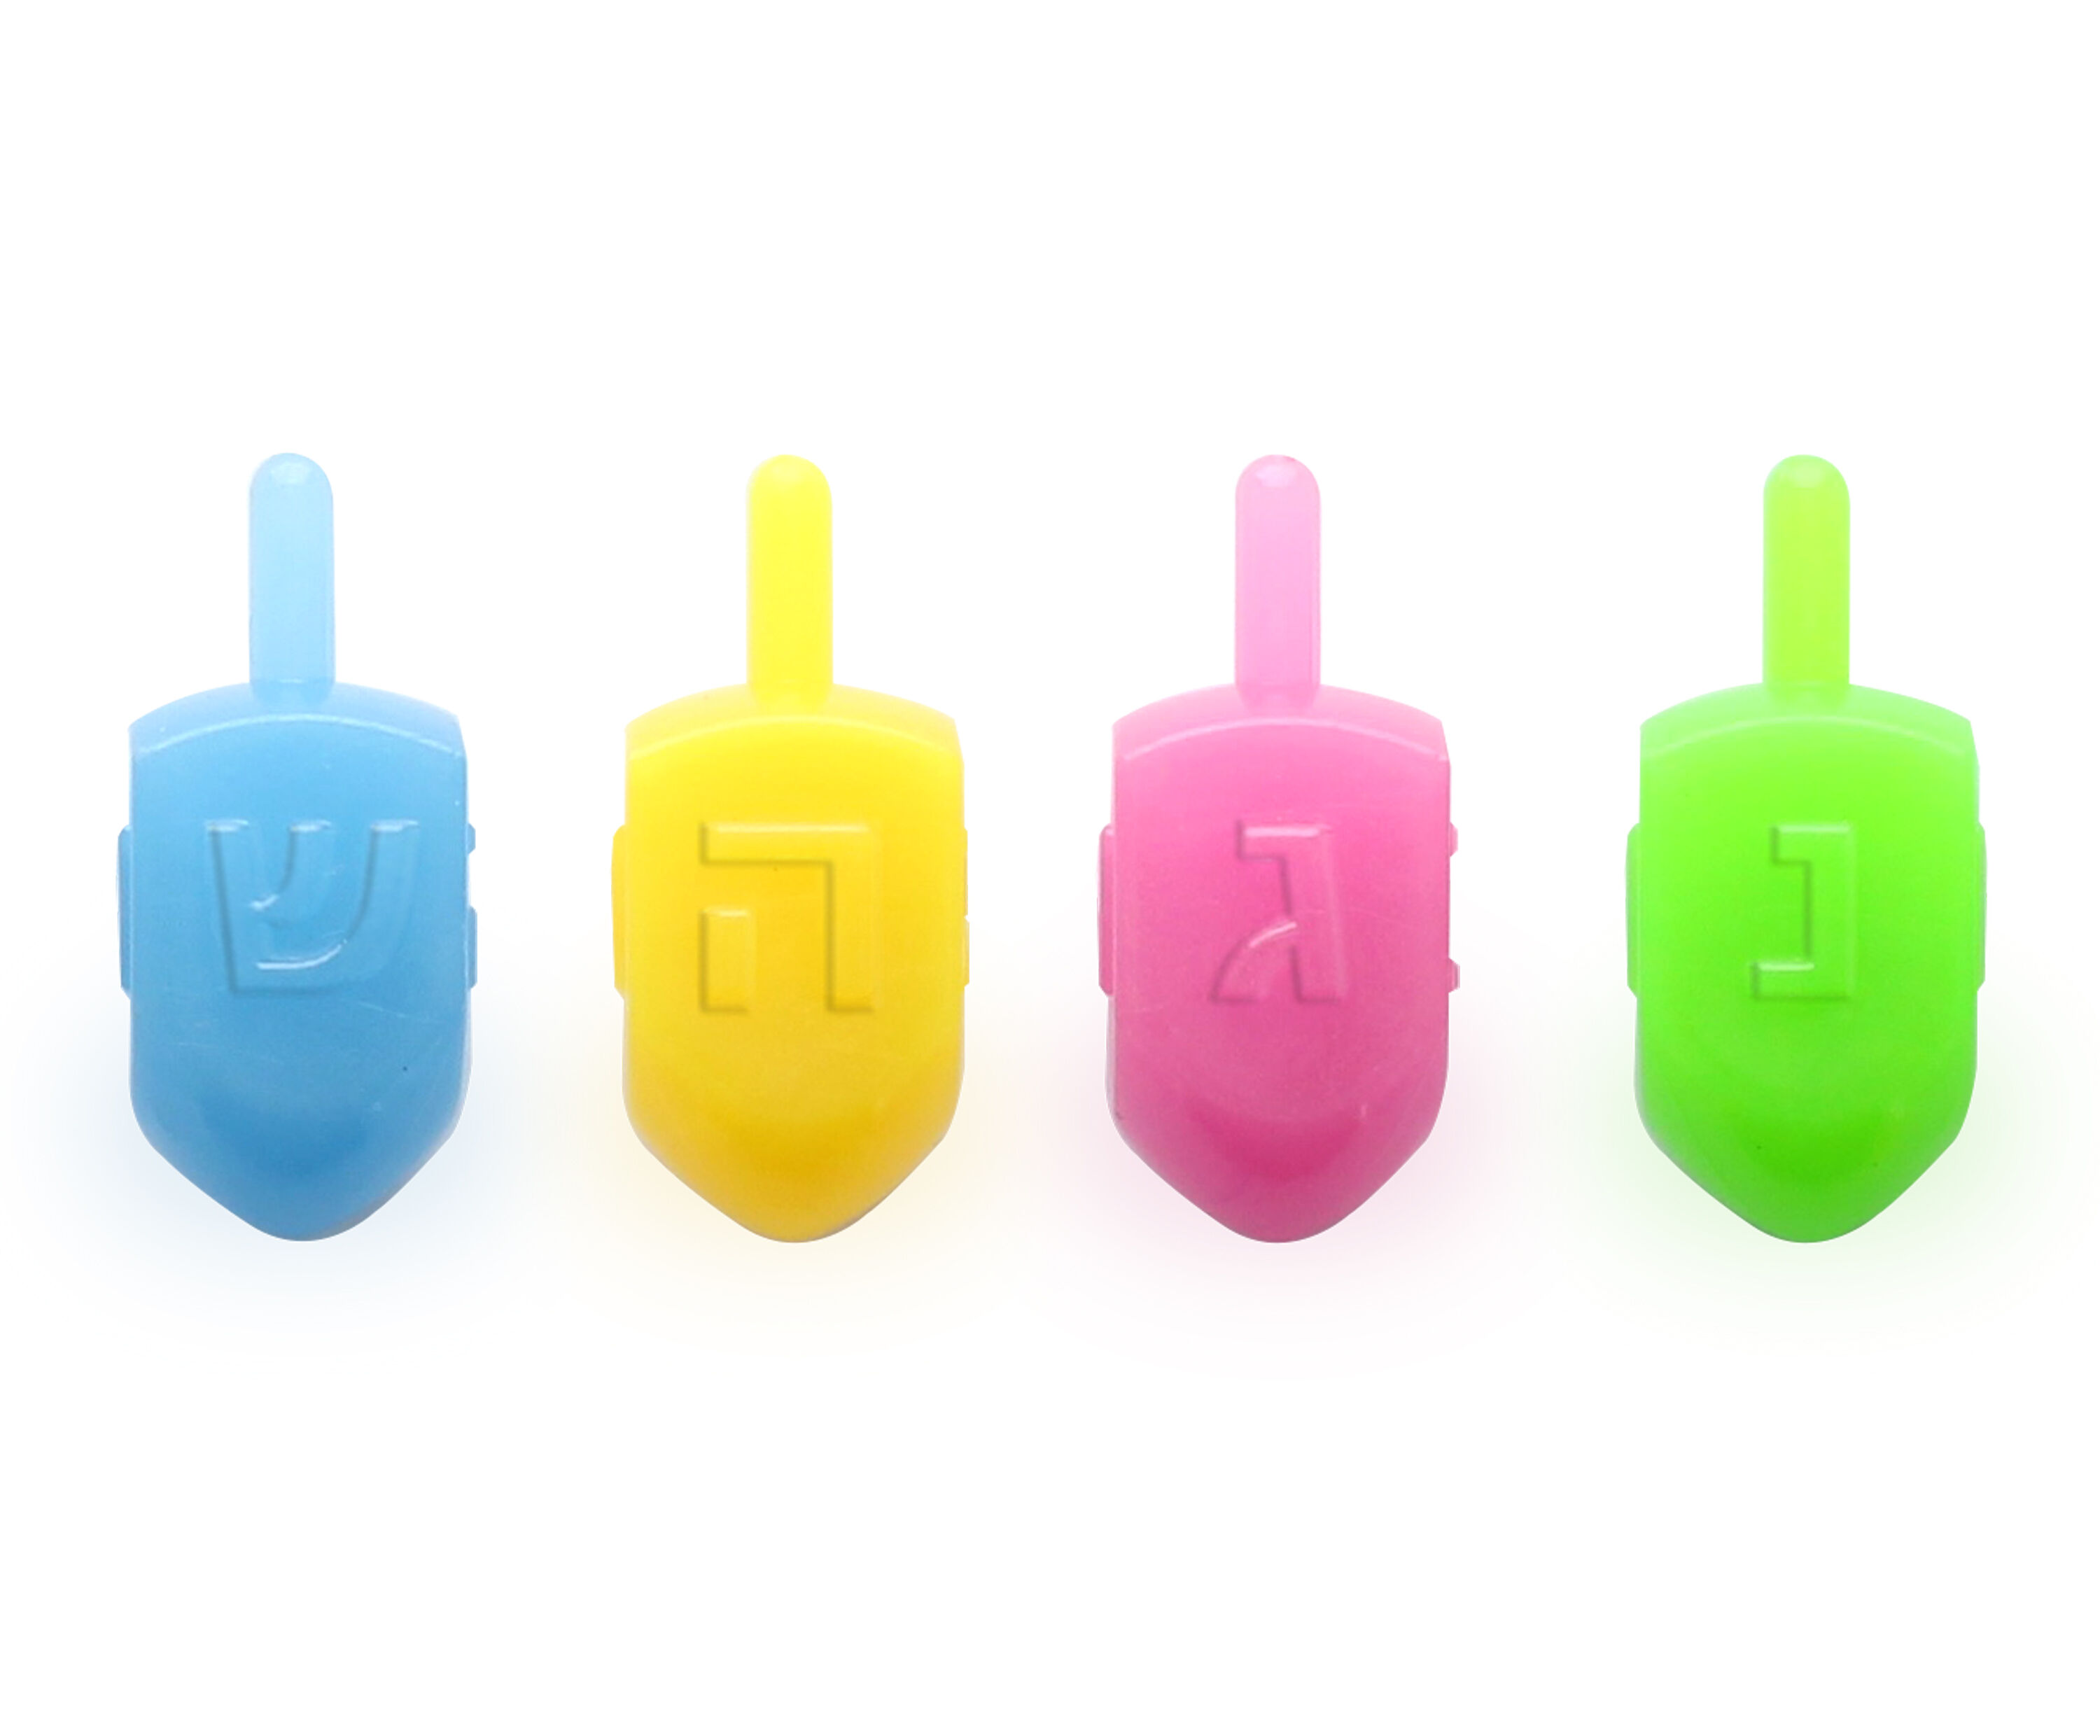 Bulk 100 Pack Mefoar Judaica Assorted Colored Dreidels Classic Chanukah Kids Toy Traditional Plastic Draidels with Game Instructions Gift or Party Favor 